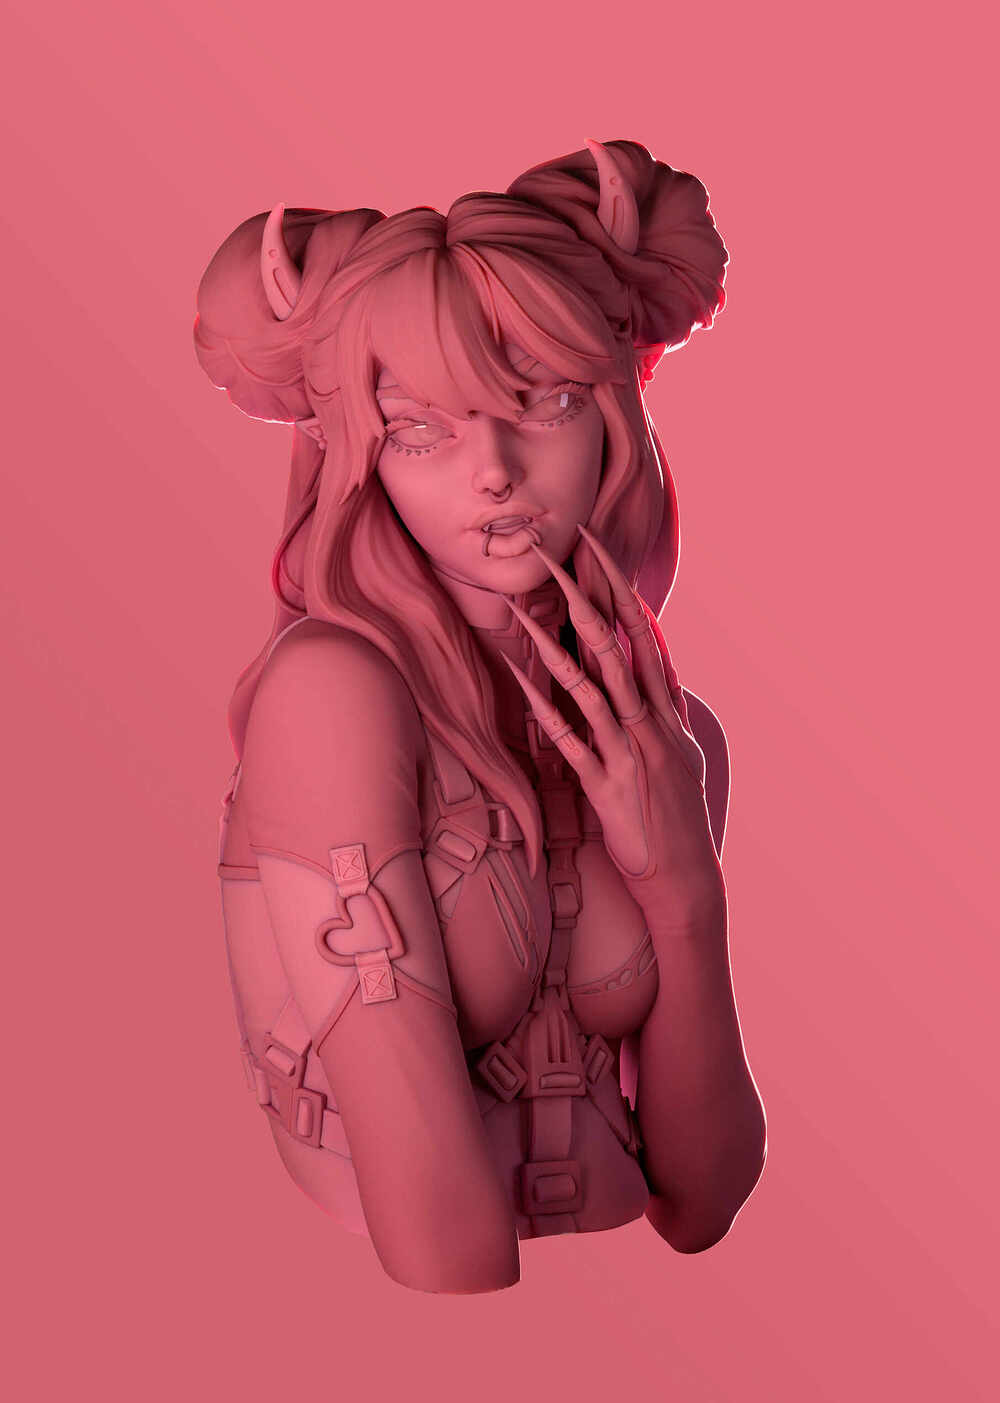 ZbrushCentral